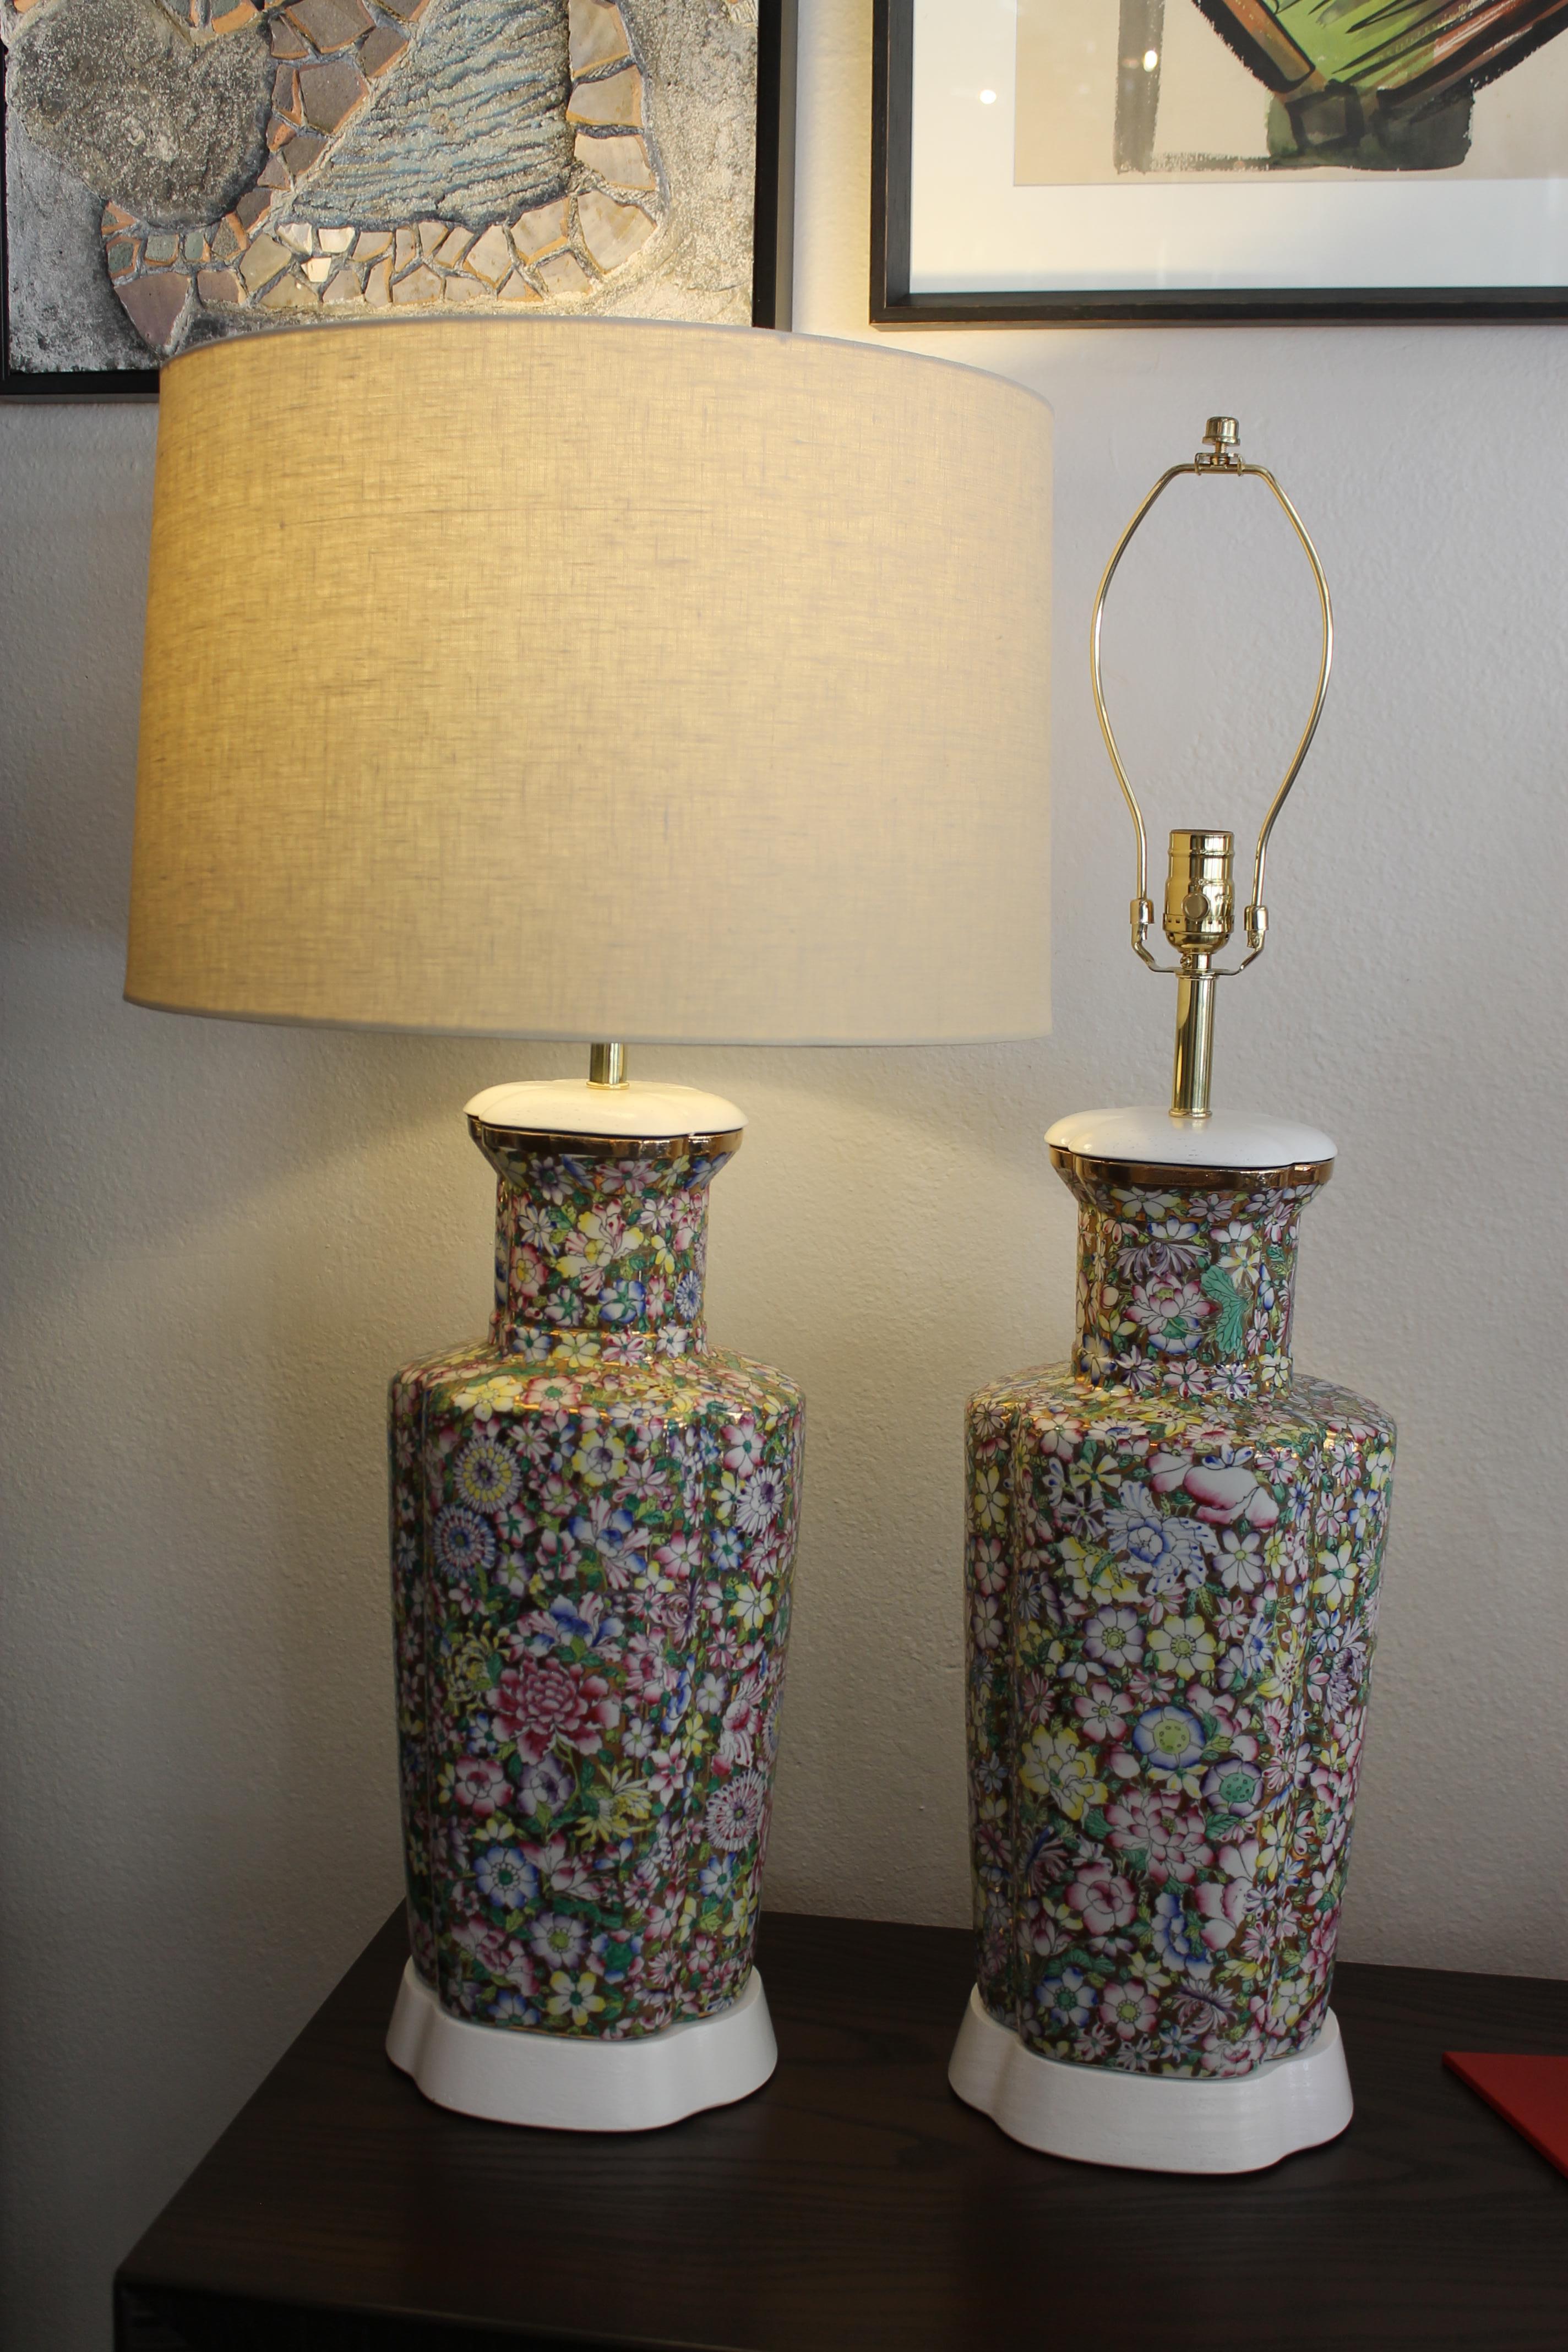 Hand painted flowers on porcelain resulting in a stunning pair of lamps. Stamped on the bottom during rewiring says ‘Japanese Porcelain Ware Decorated in Hong Kong’. Lamps measures 23.5” high from base to the bottom of socket. Ceramic portions 8.75”